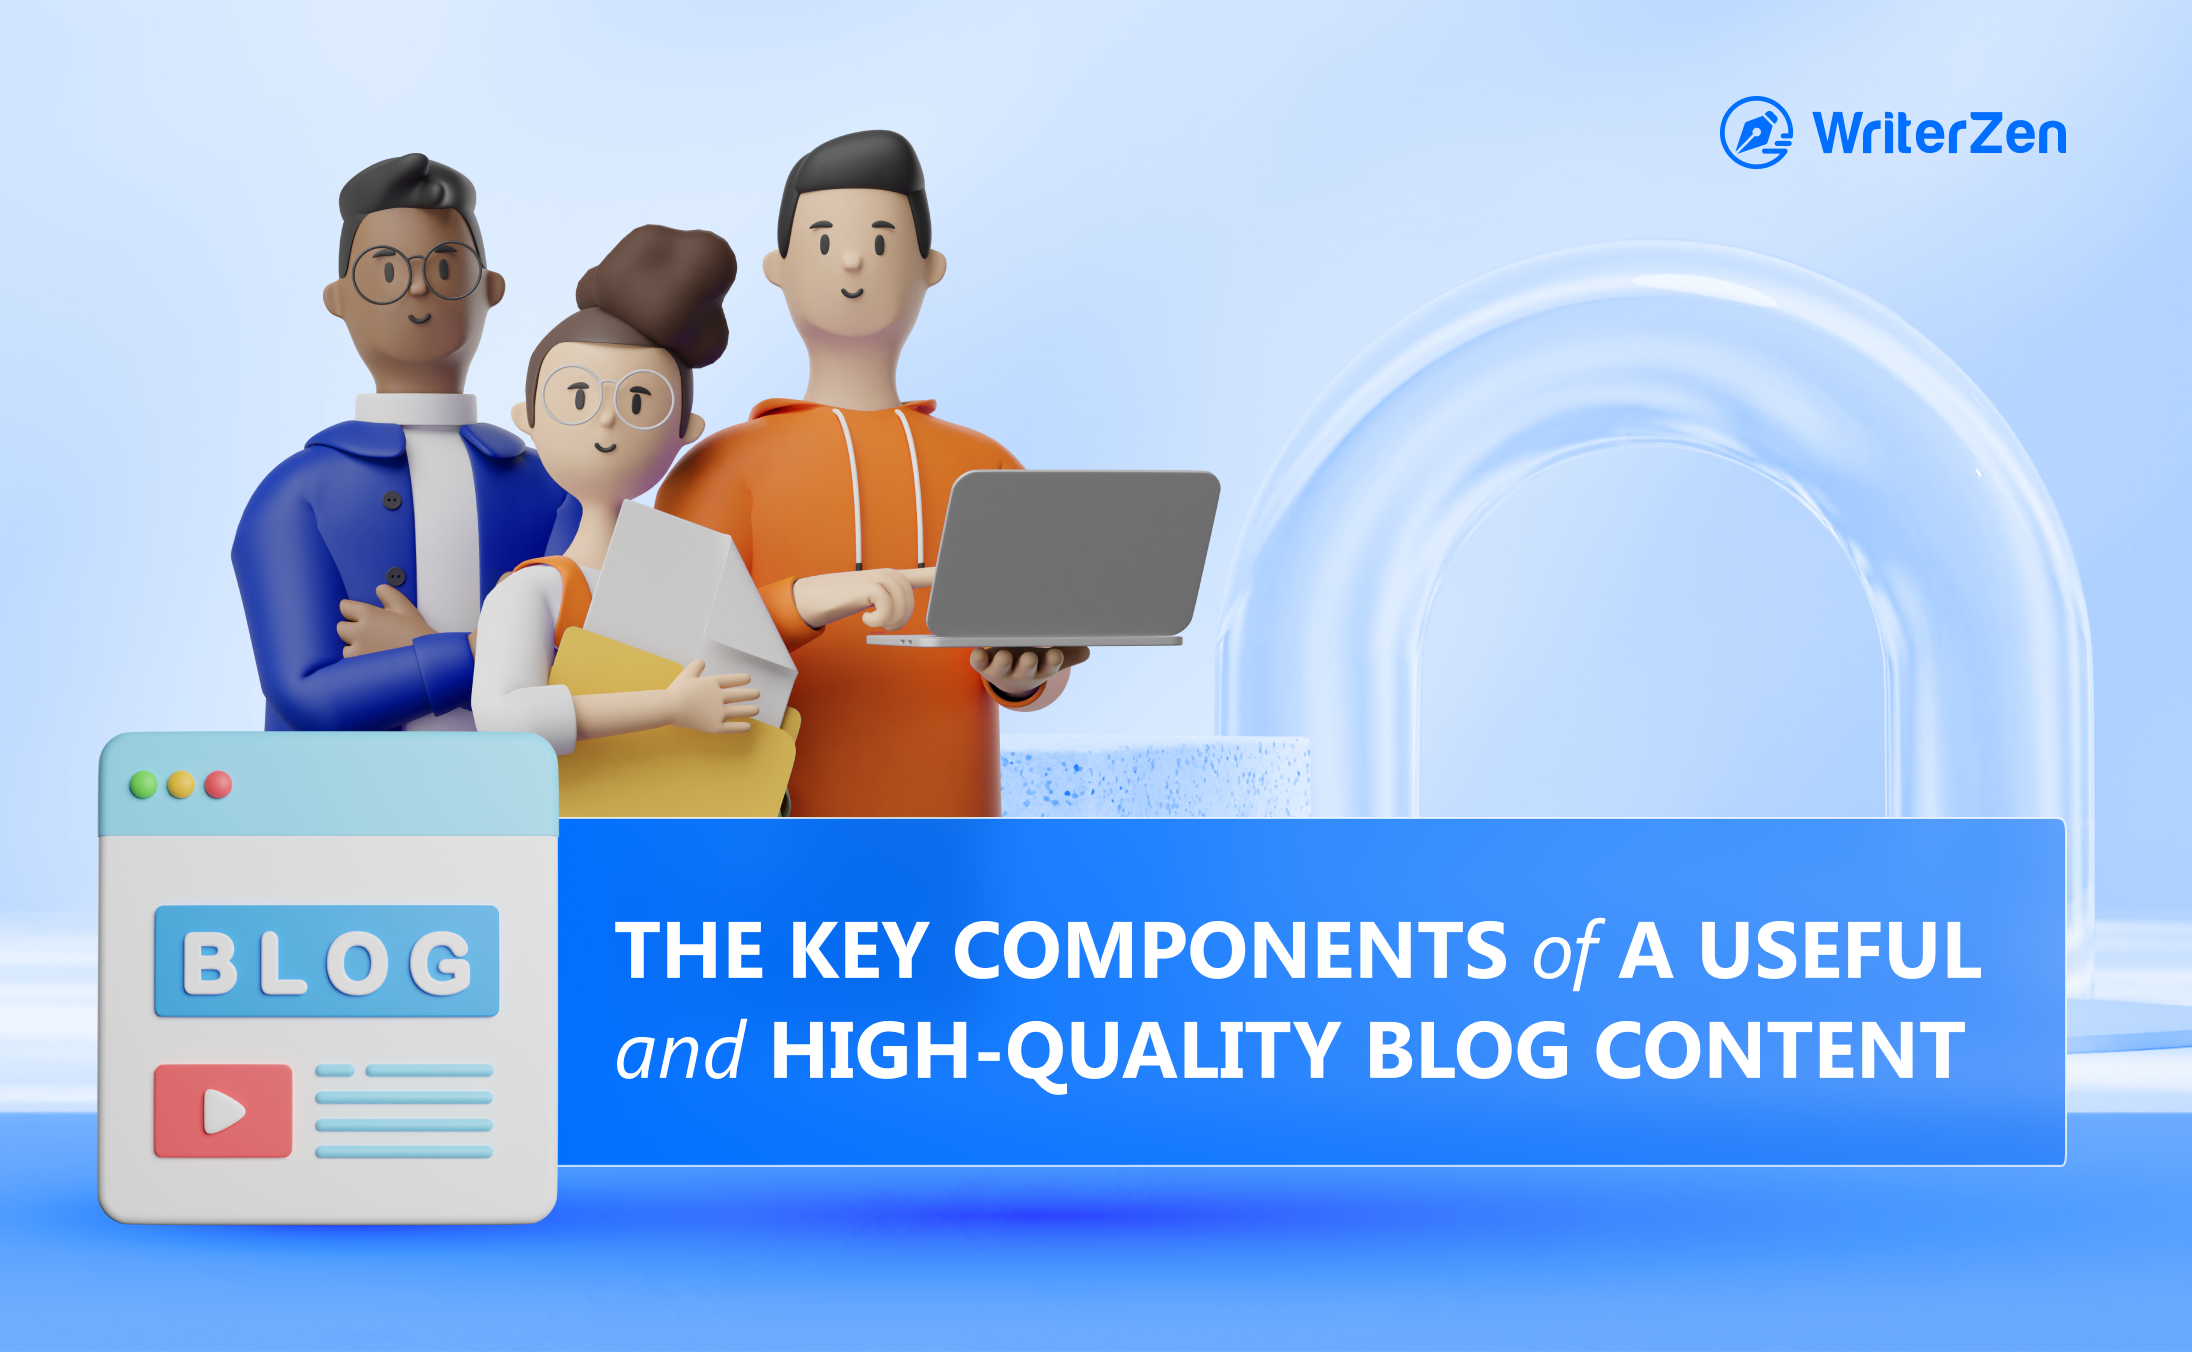 The Key Components of a Useful and High-Quality Blog Content